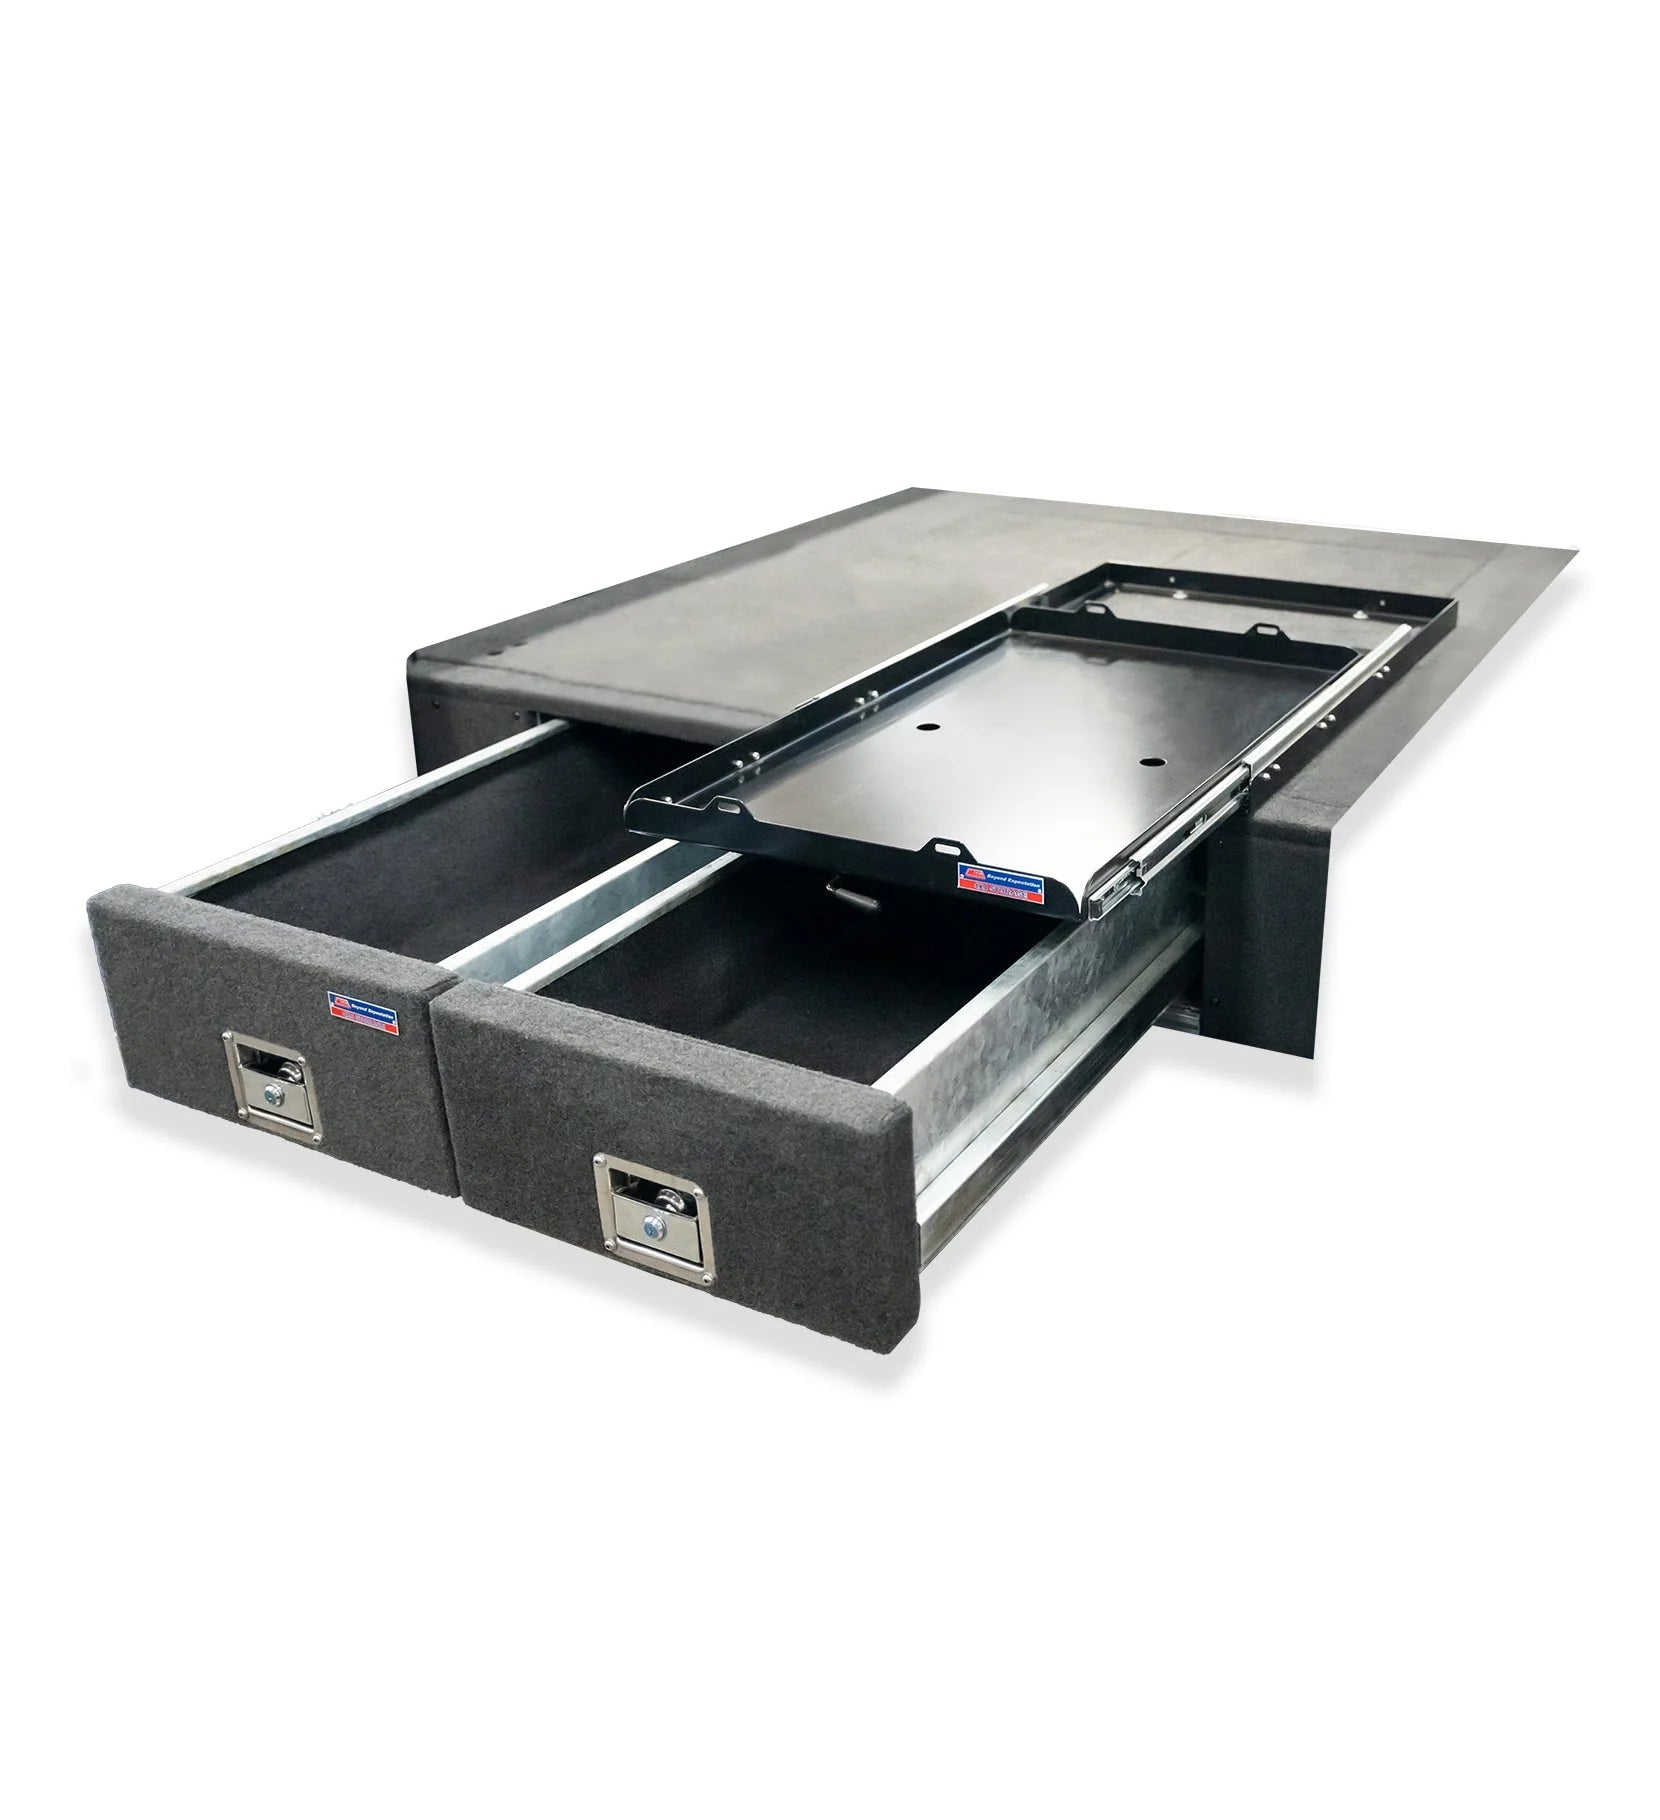 044-02m Rodeo Ra 03-07 Dual Cab Drawer System With Medium Slide